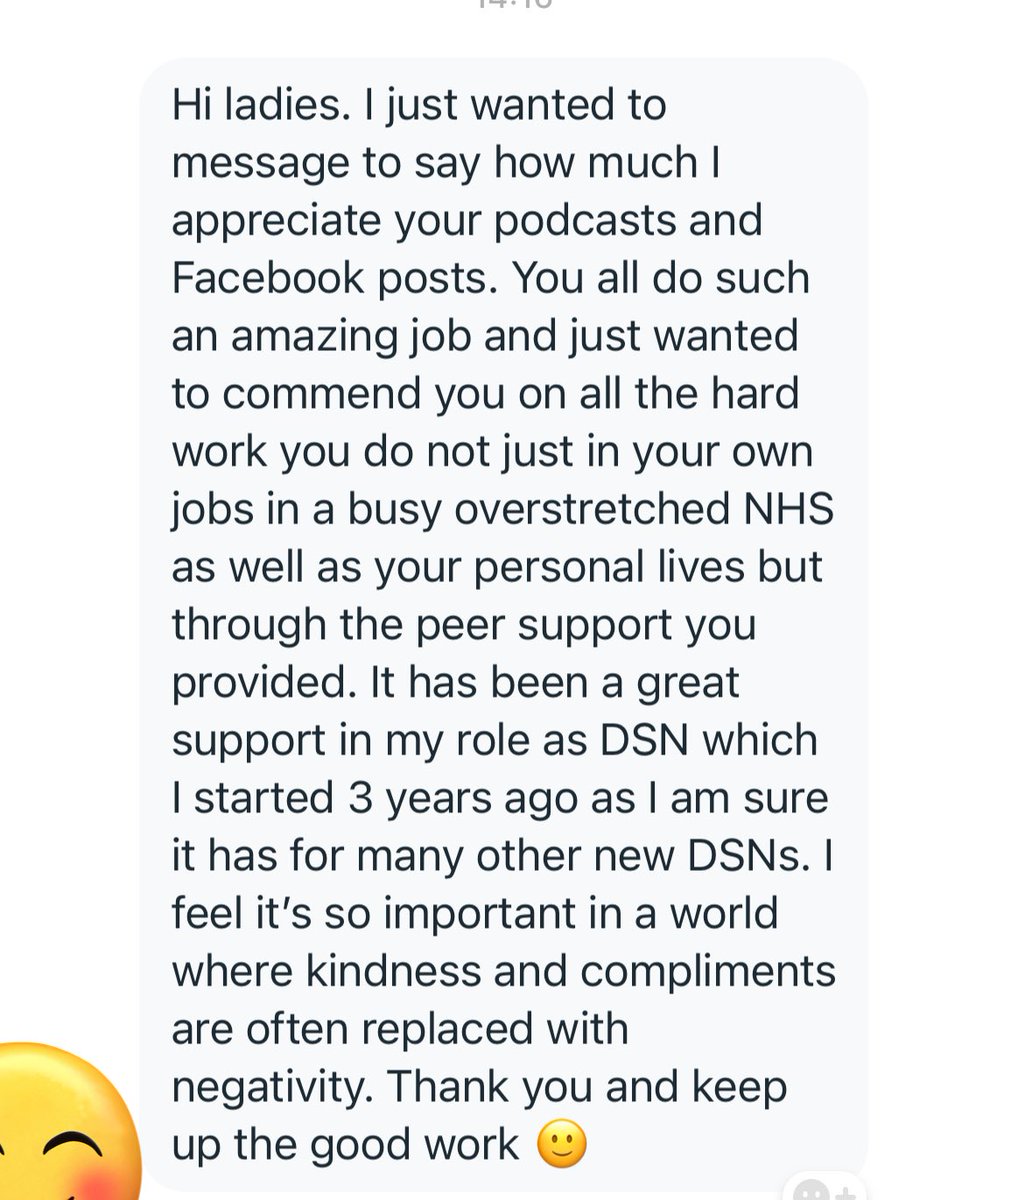 So lovely to receive this message today!  💙 

#TeamDSN #CNSvalue